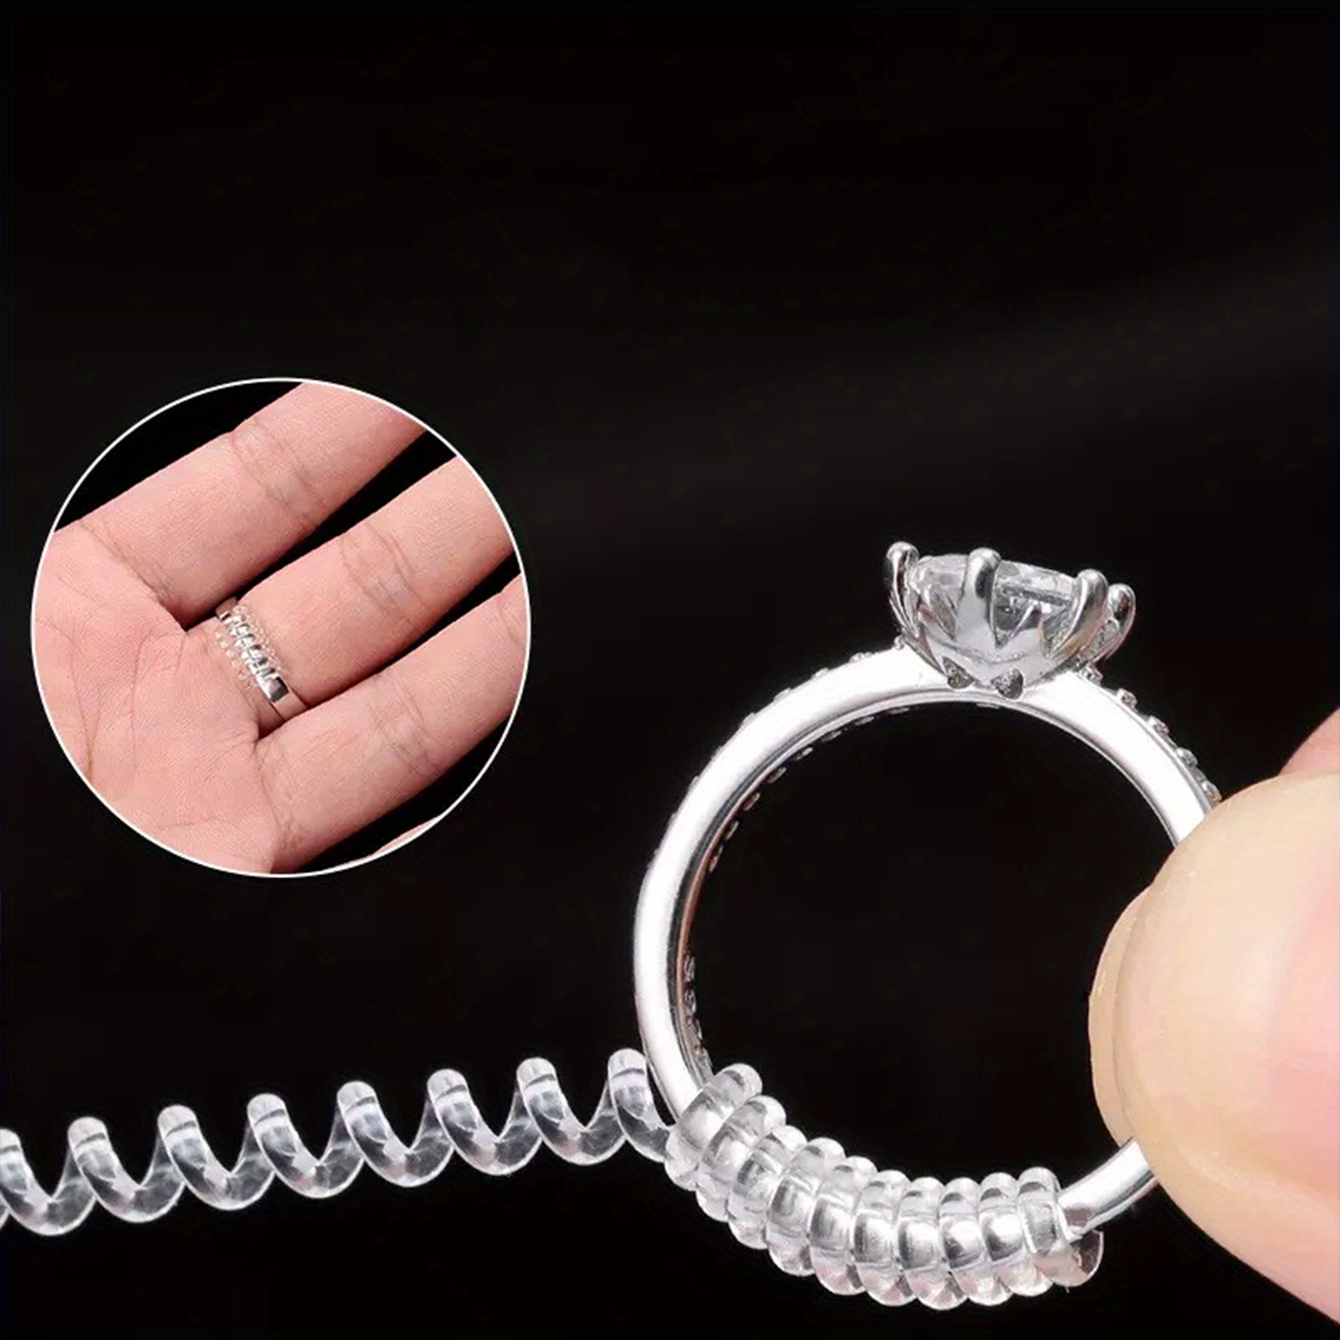 Ring Silicone Adjuster